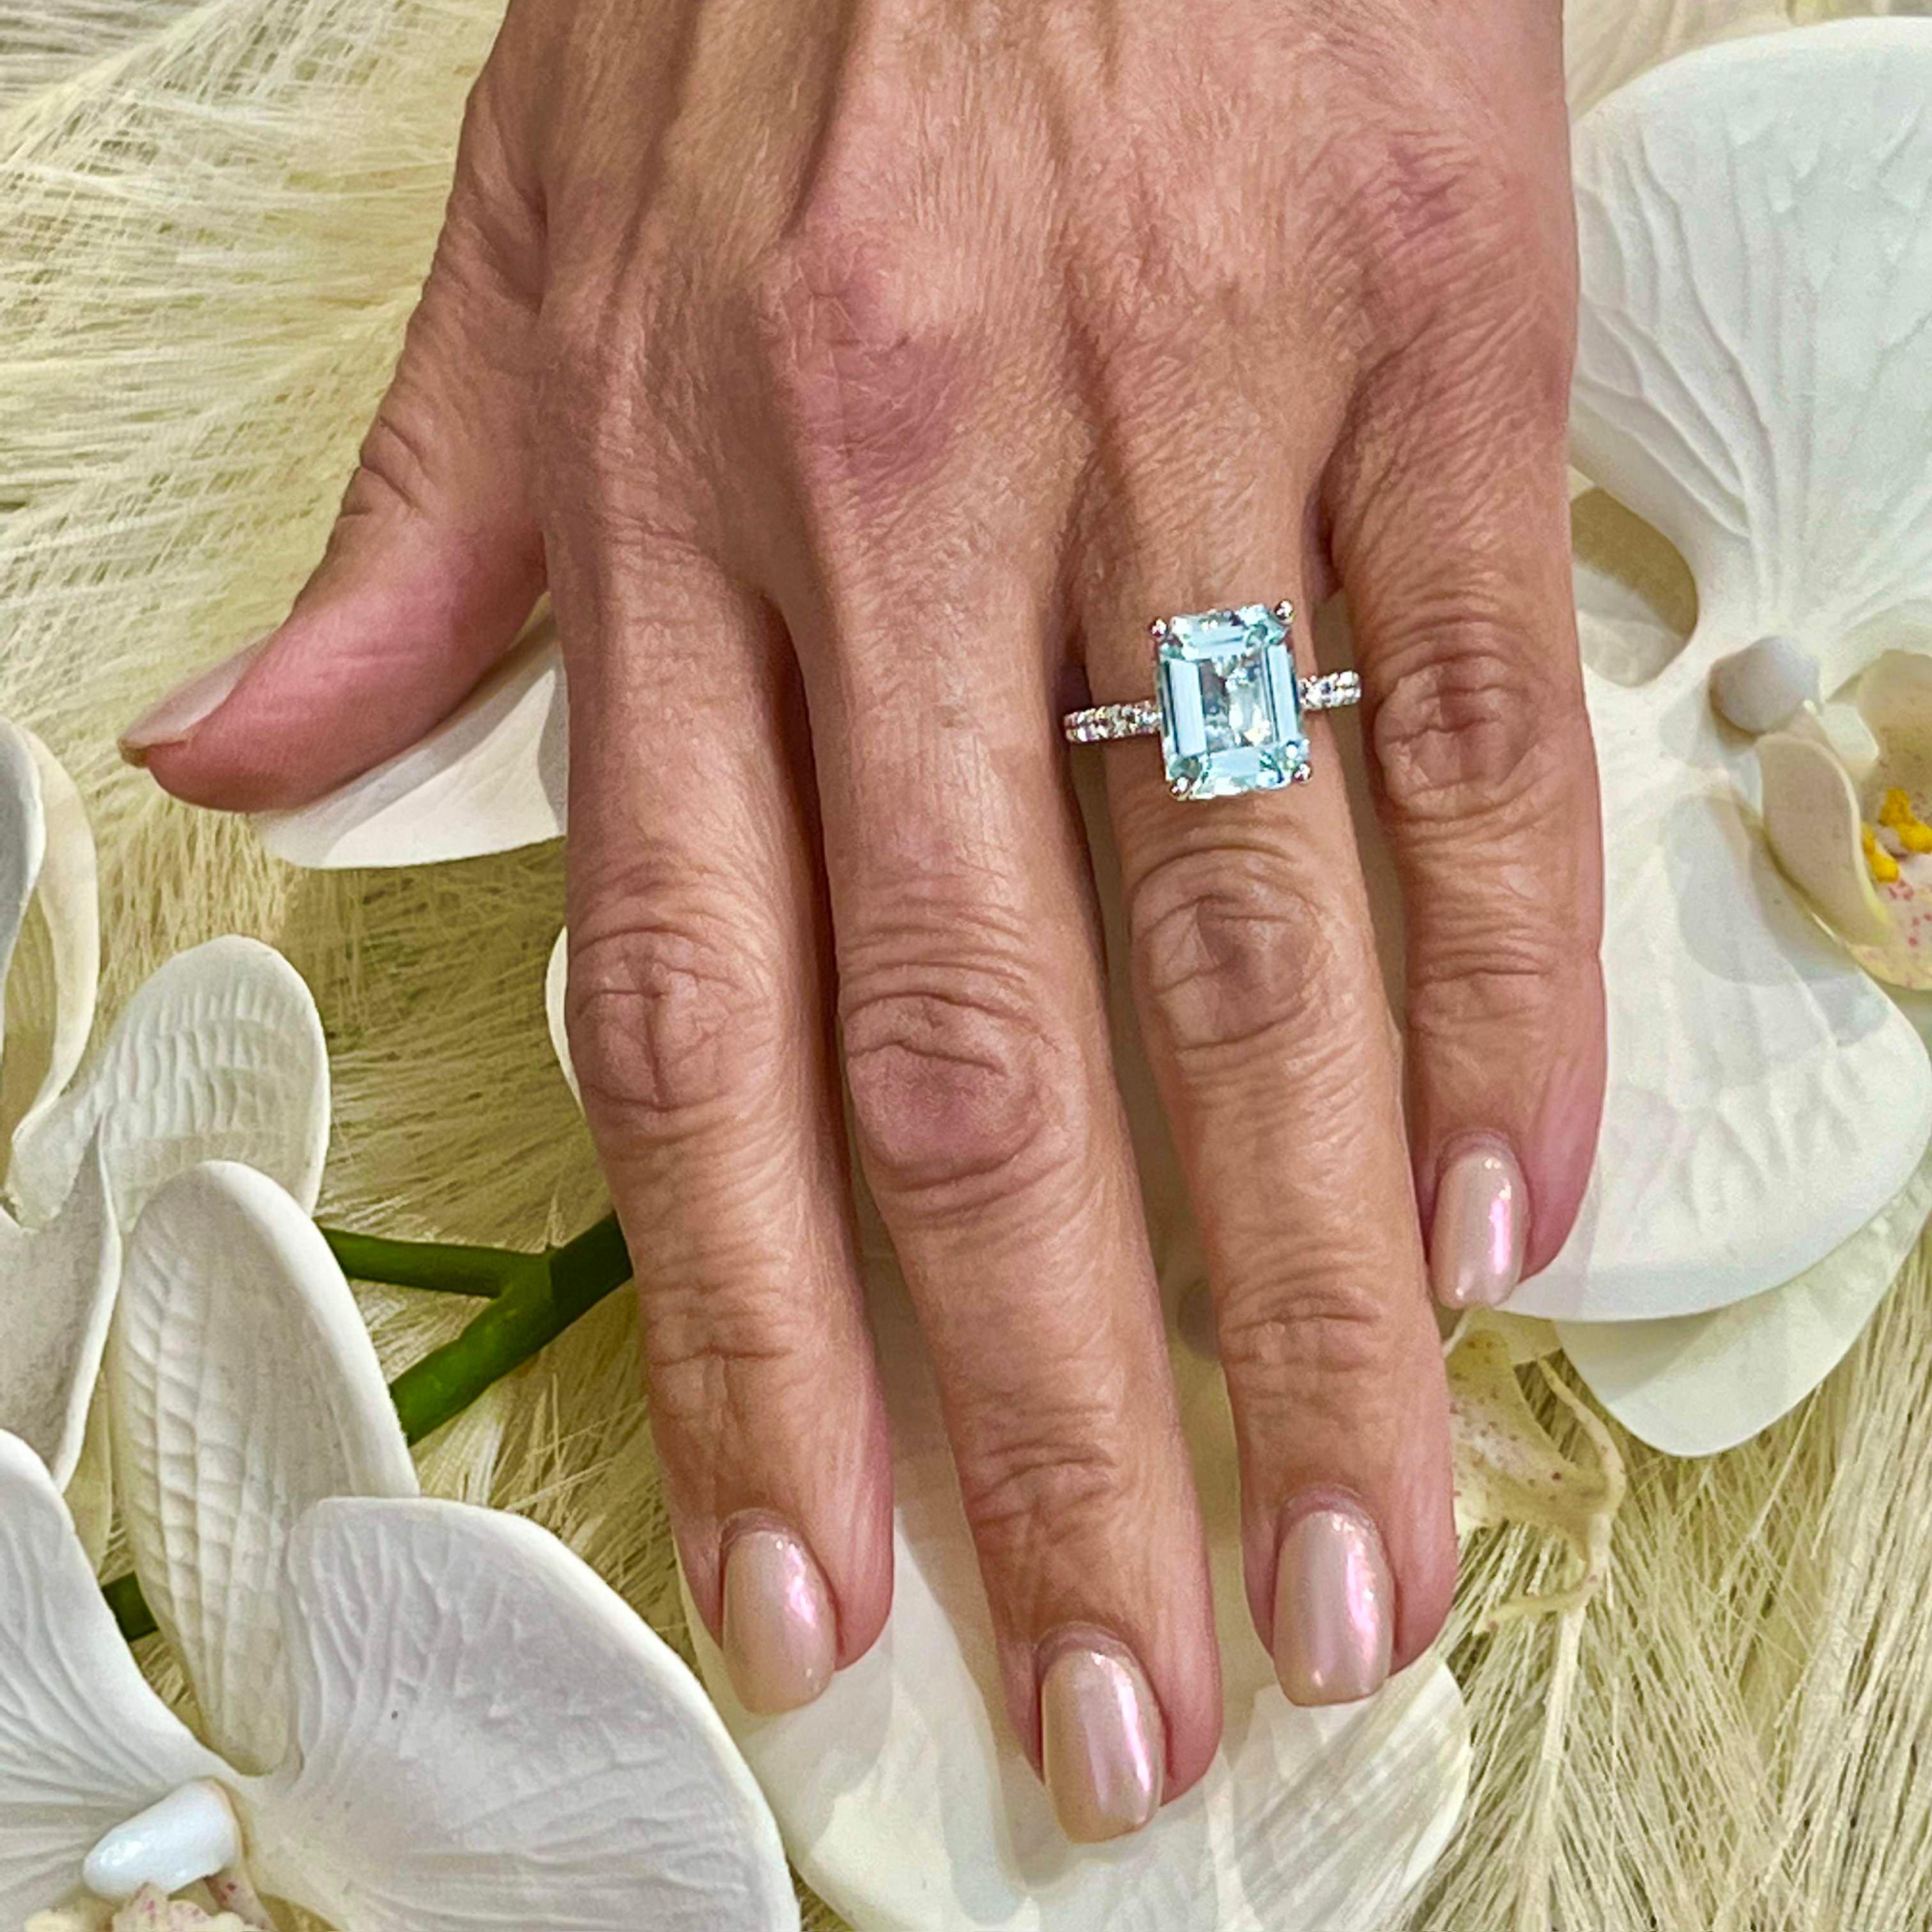 Natural Aquamarine Diamond Ring Size 6.5 14k W Gold 5.78 TCW Certified $4,950 217851

This is a Unique Custom Made Glamorous Piece of Jewelry!

Nothing says, “I Love you” more than Diamonds and Pearls!

This Aquamarine ring has been Certified,